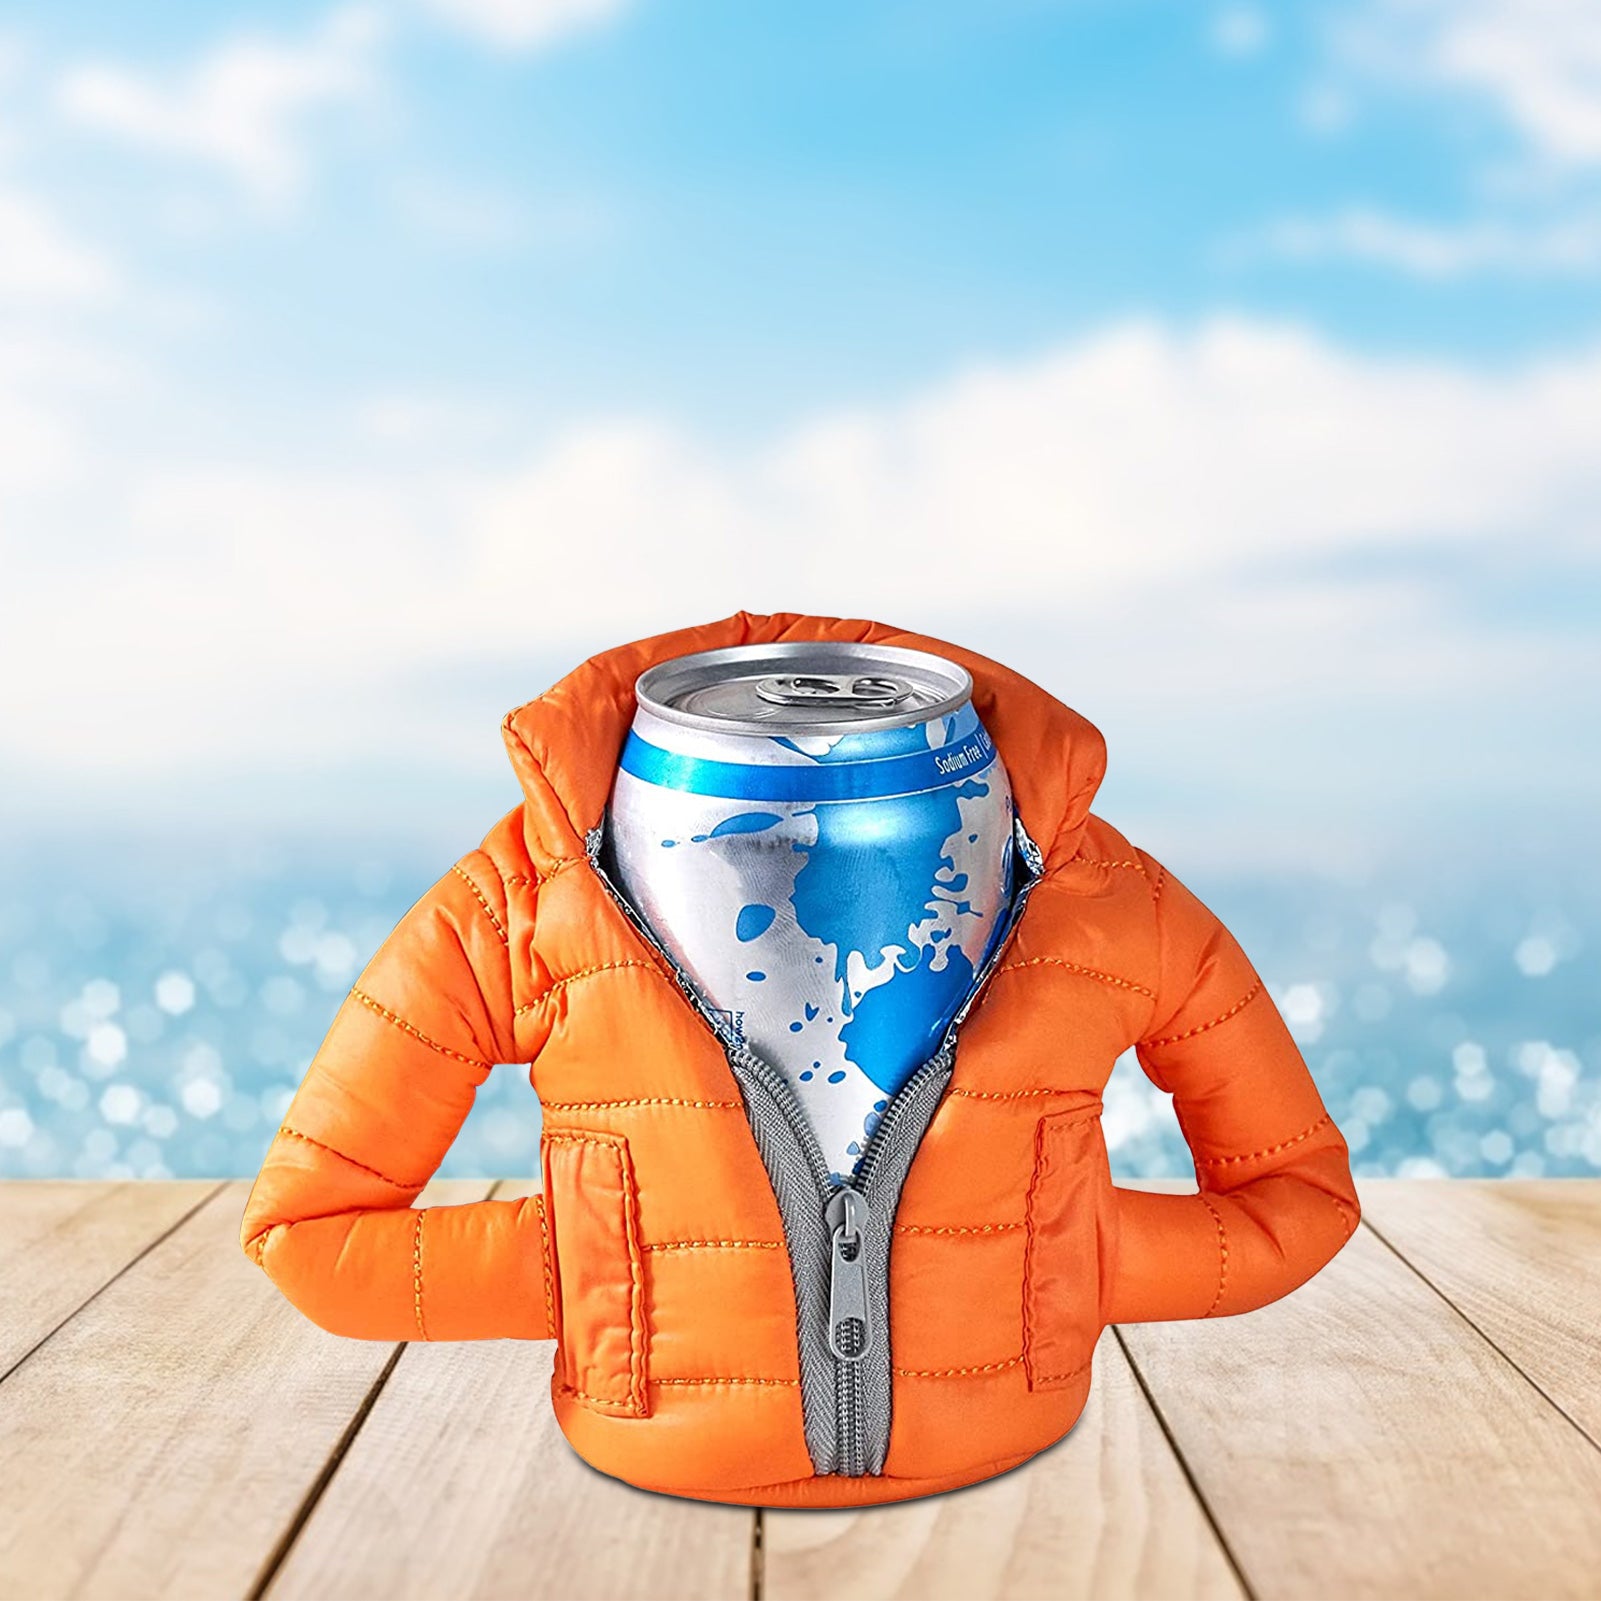 An orange insulated drink cooler designed to look identical to a miniature insulated jacket. There is a can of drink inside the can cooler jacket.